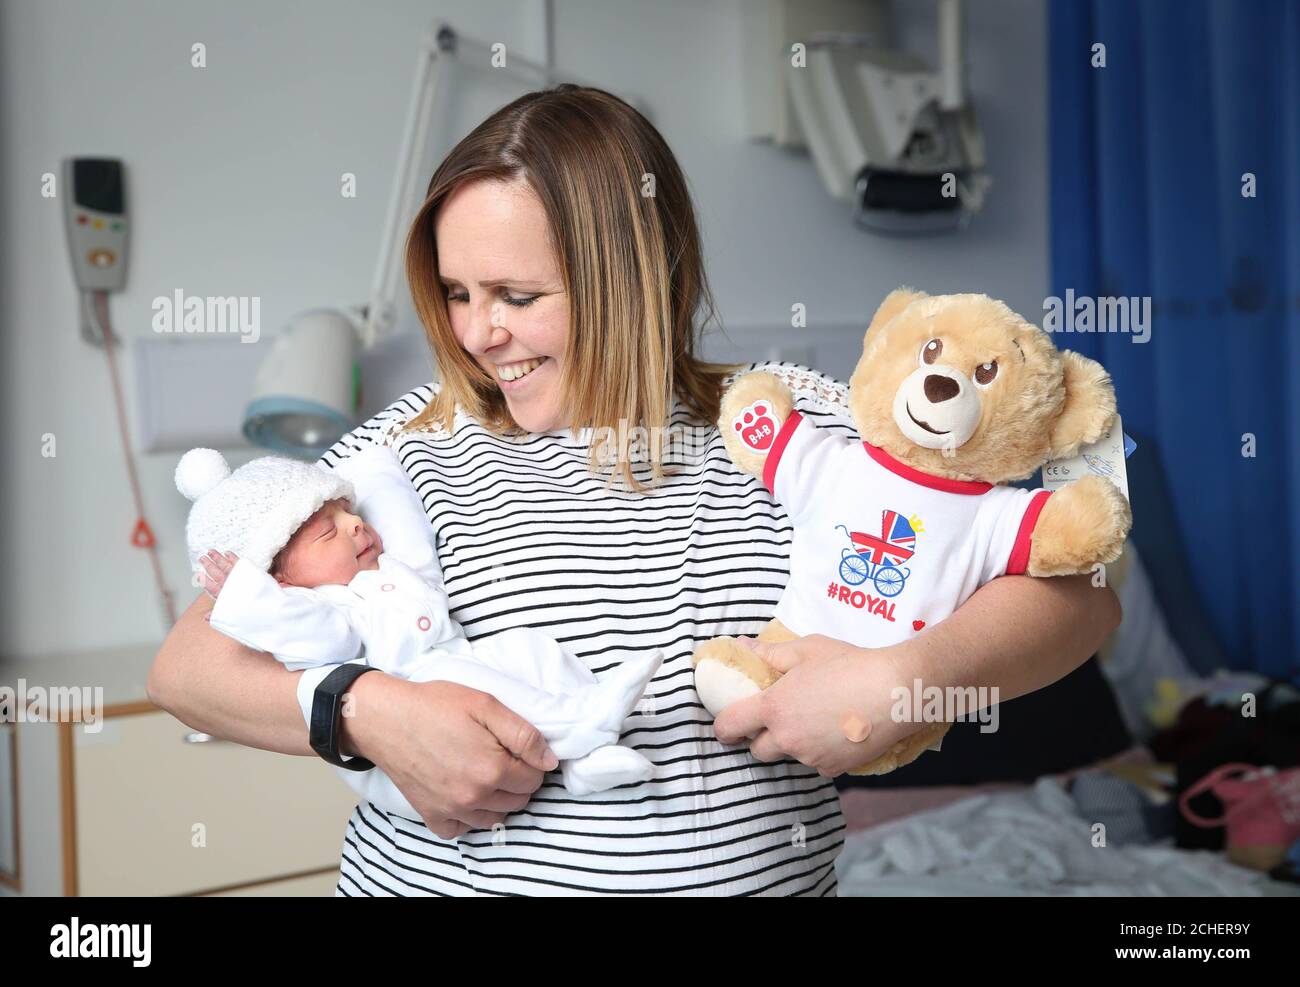 EMBARGOED TO 0001 WEDNESDAY MAY 8 EDITORIAL USE ONLY Carmen Barrett from Petersfield, with her daughter Sienna Rose and a toy bear at the Royal Surrey County Hospital in Guildford as the Build-A-Bear workshop celebrates the historic birth of the latest royal by delivering 1,000 bears to new-borns at 10 royal hospitals, infirmaries and maternity units across the UK. Stock Photo